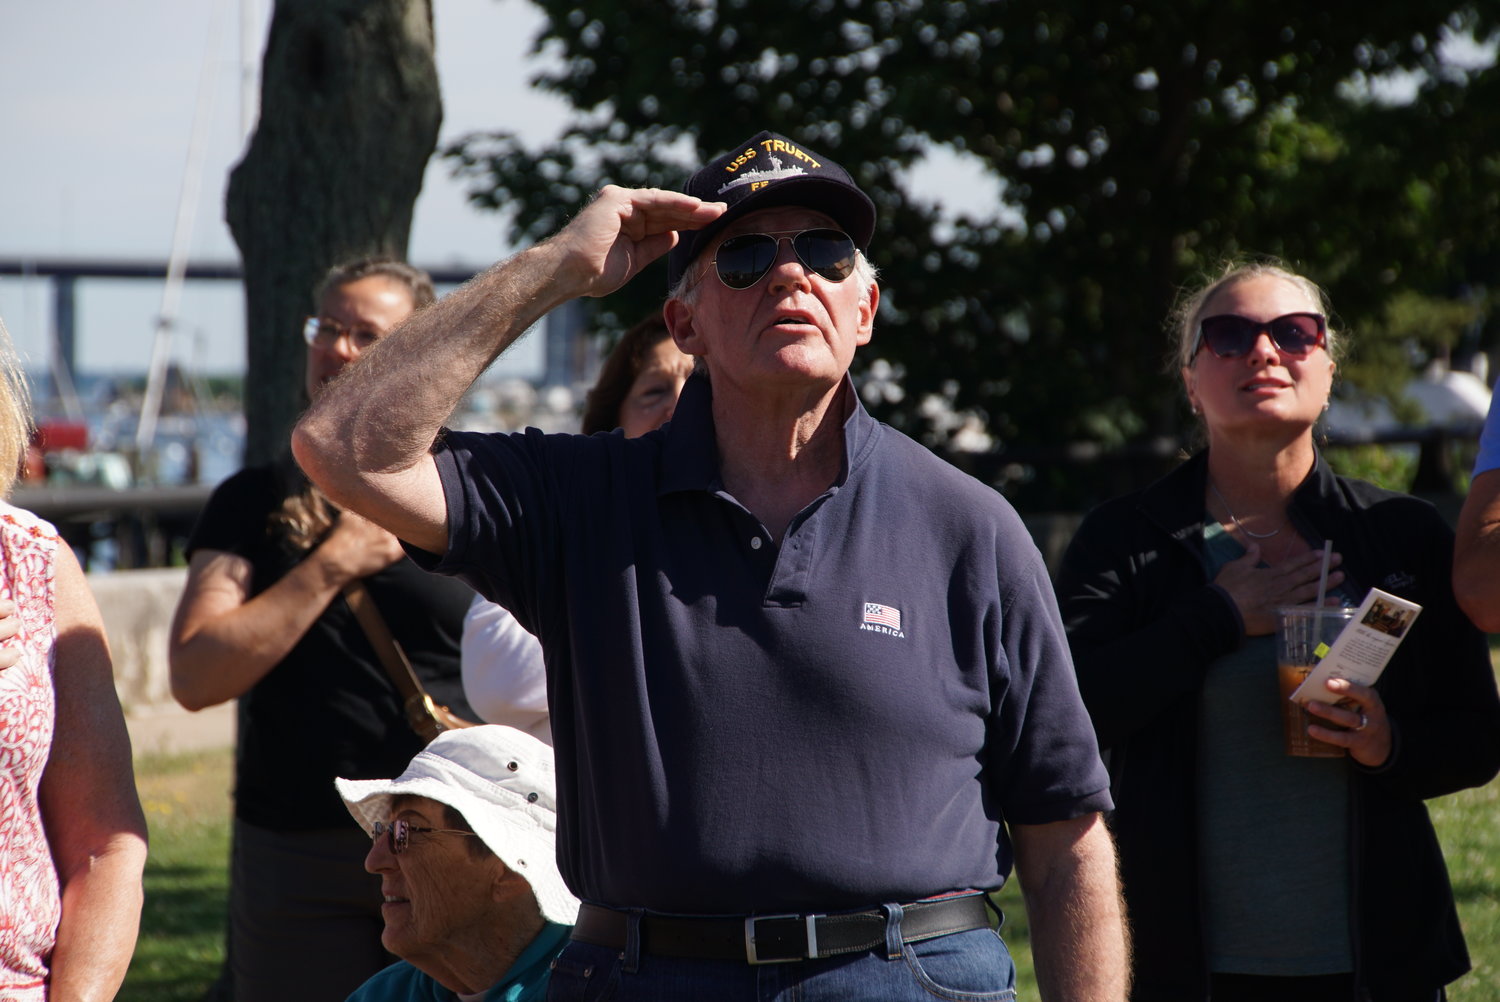 John Higginbotham, a United States Navy veteran who served on the USS Truitt and USS Suribachi, salutes as the crowd recites the Pledge of Allegiance Monday morning.